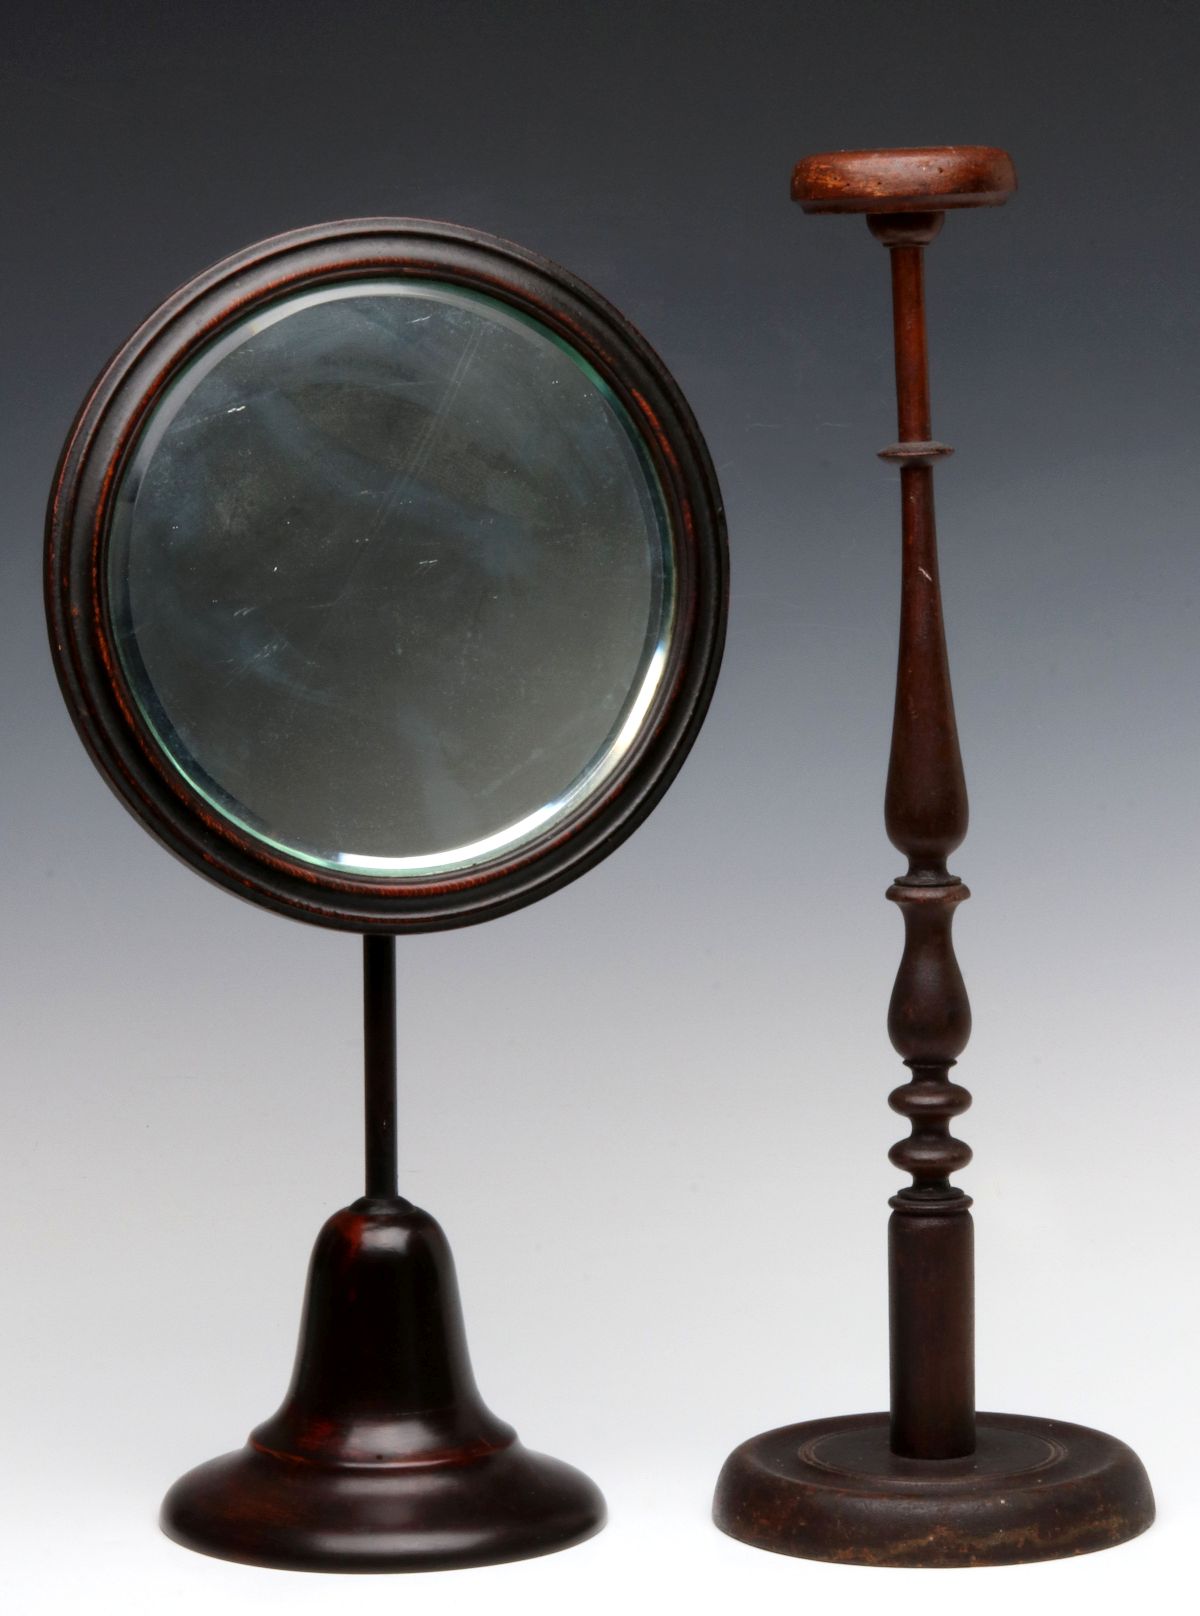 CIRCA 1900 COUNTER-TOP MIRROR AND HAT STAND